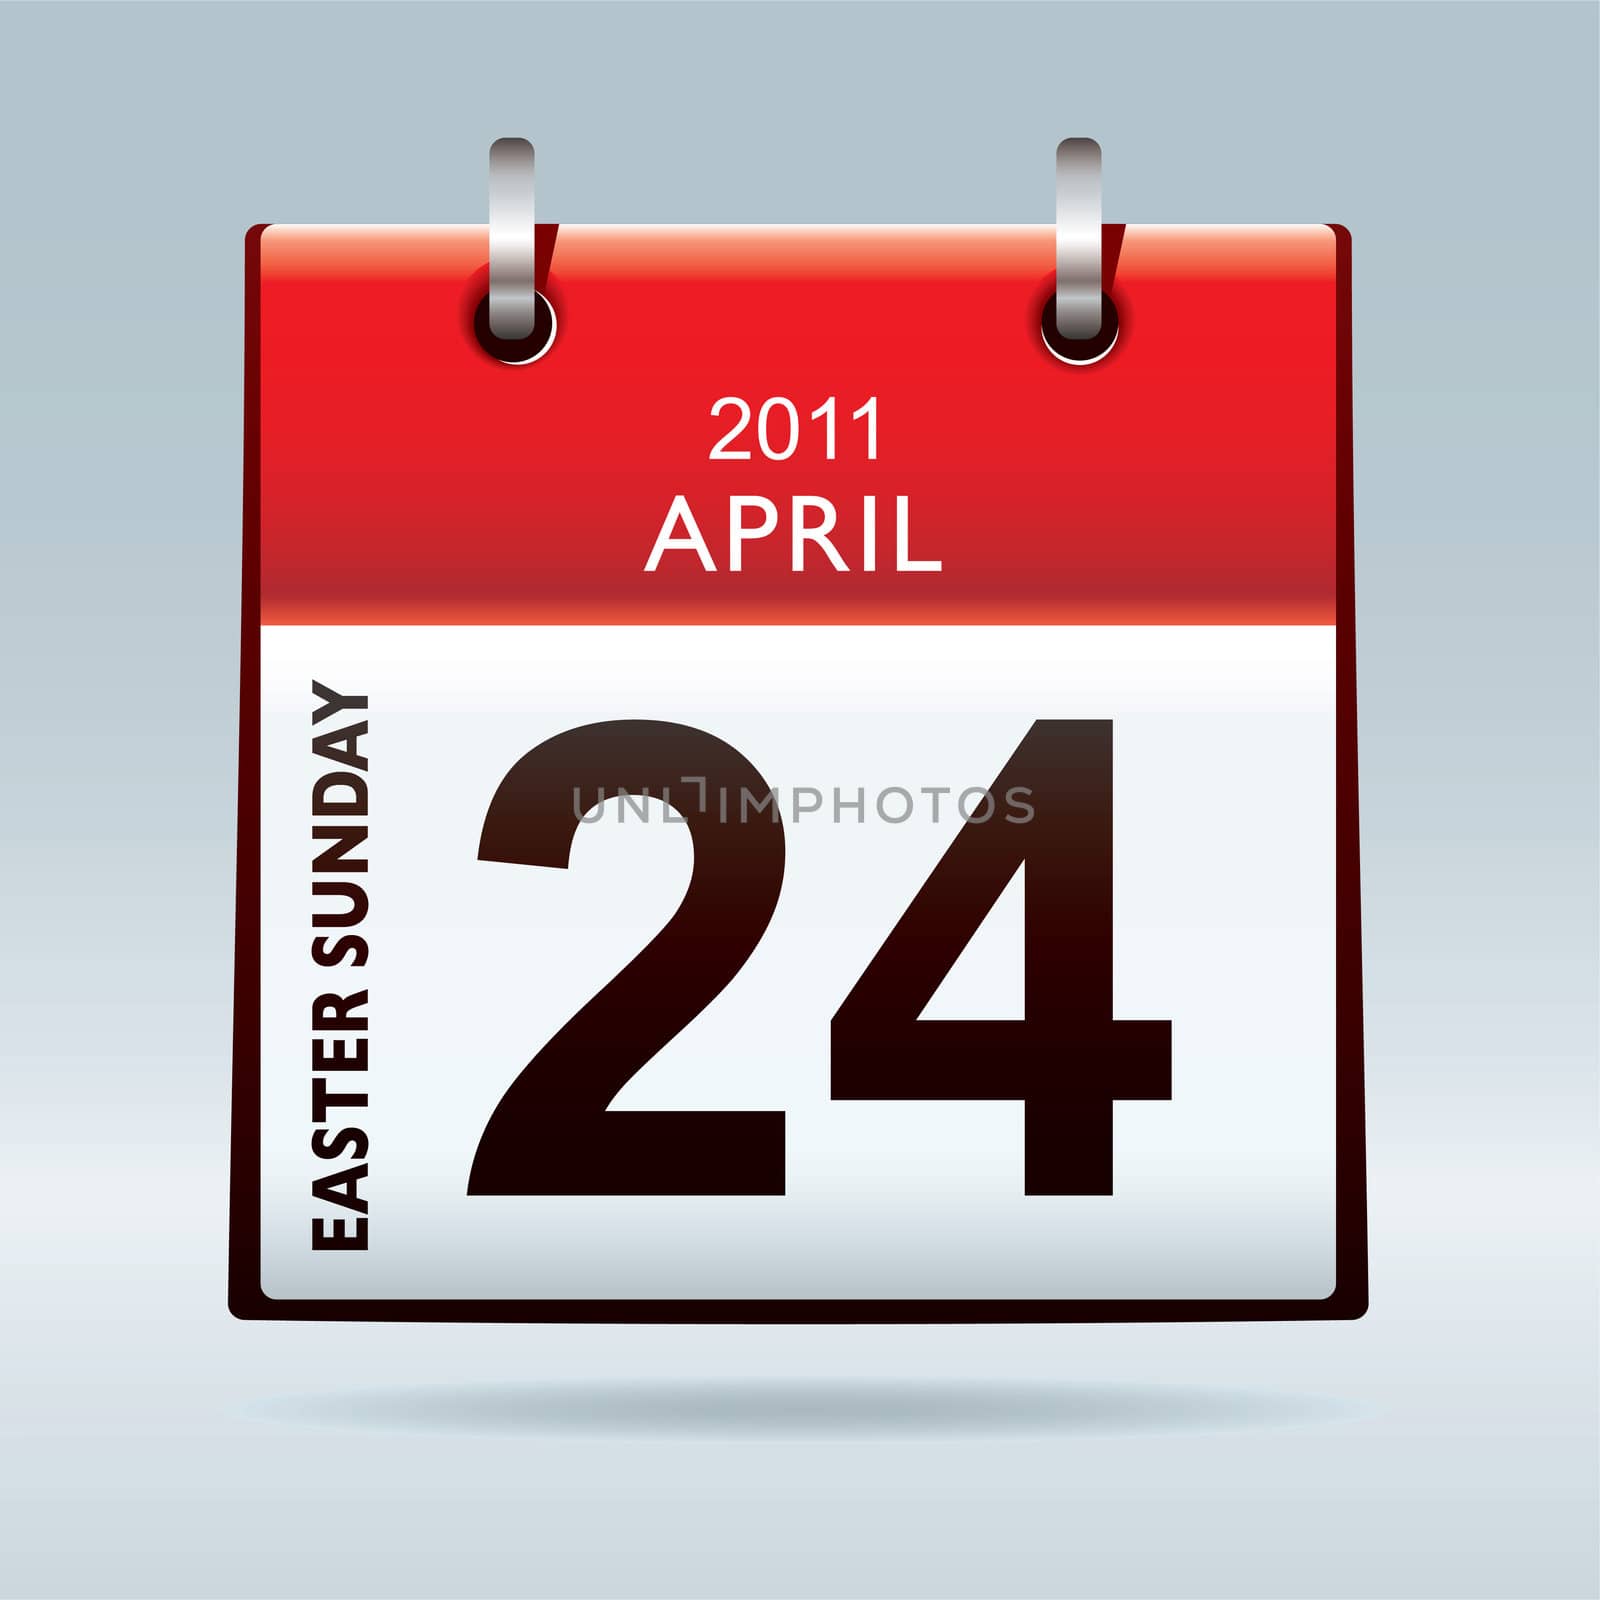 Easter Sunday calendar icon with red banner and blue background